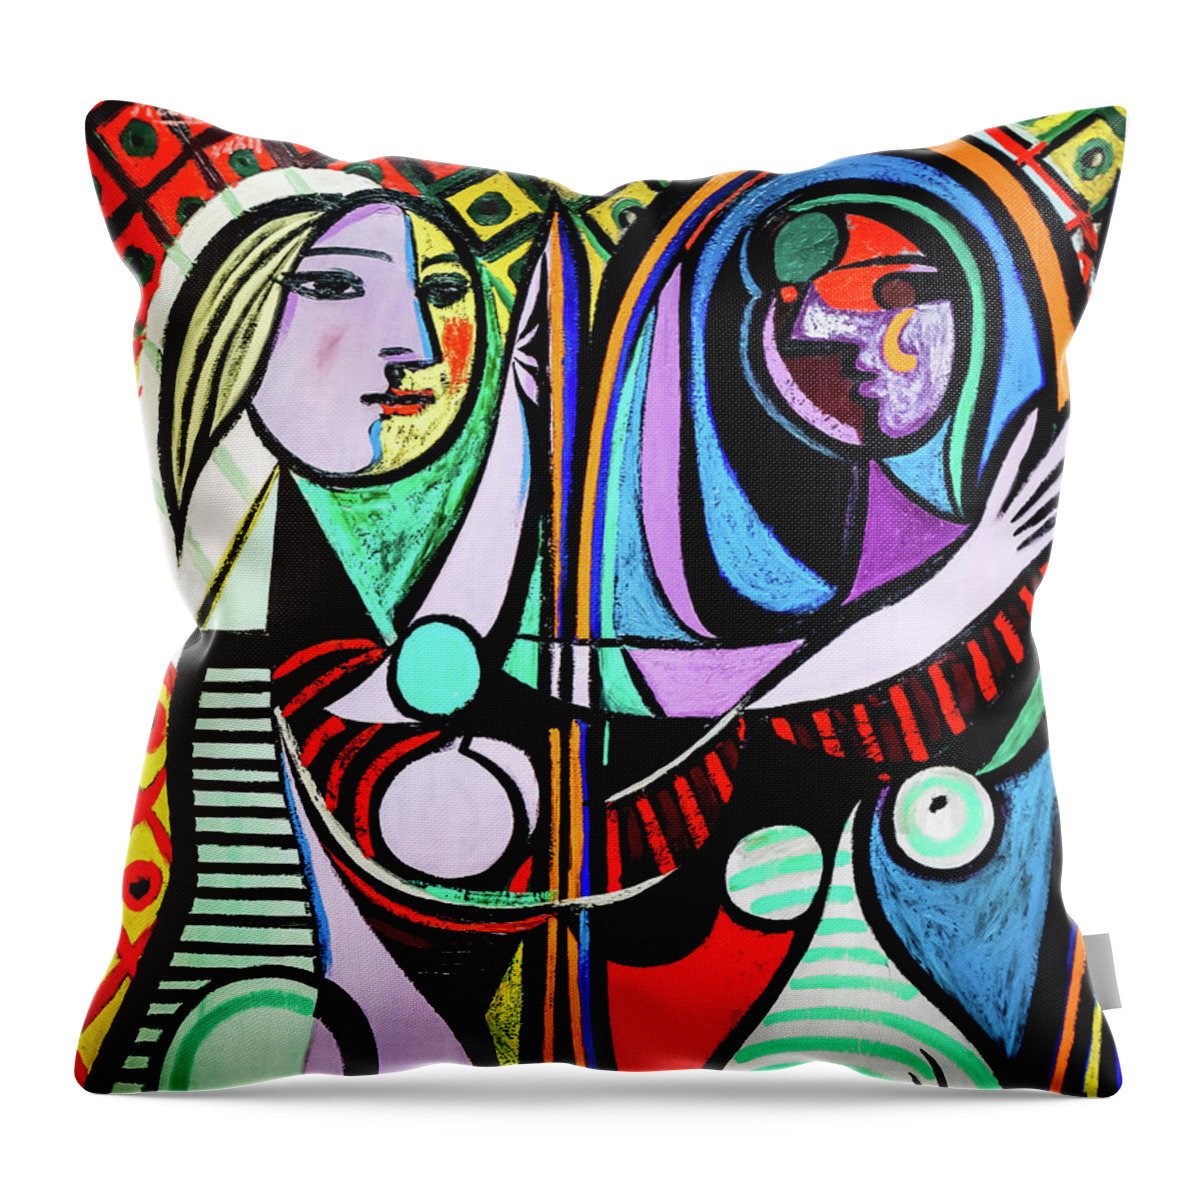 Girl Before A Mirror Throw Pillow featuring the painting Girl Before a Mirror 1932 by Pablo Picasso by Pablo Picasso